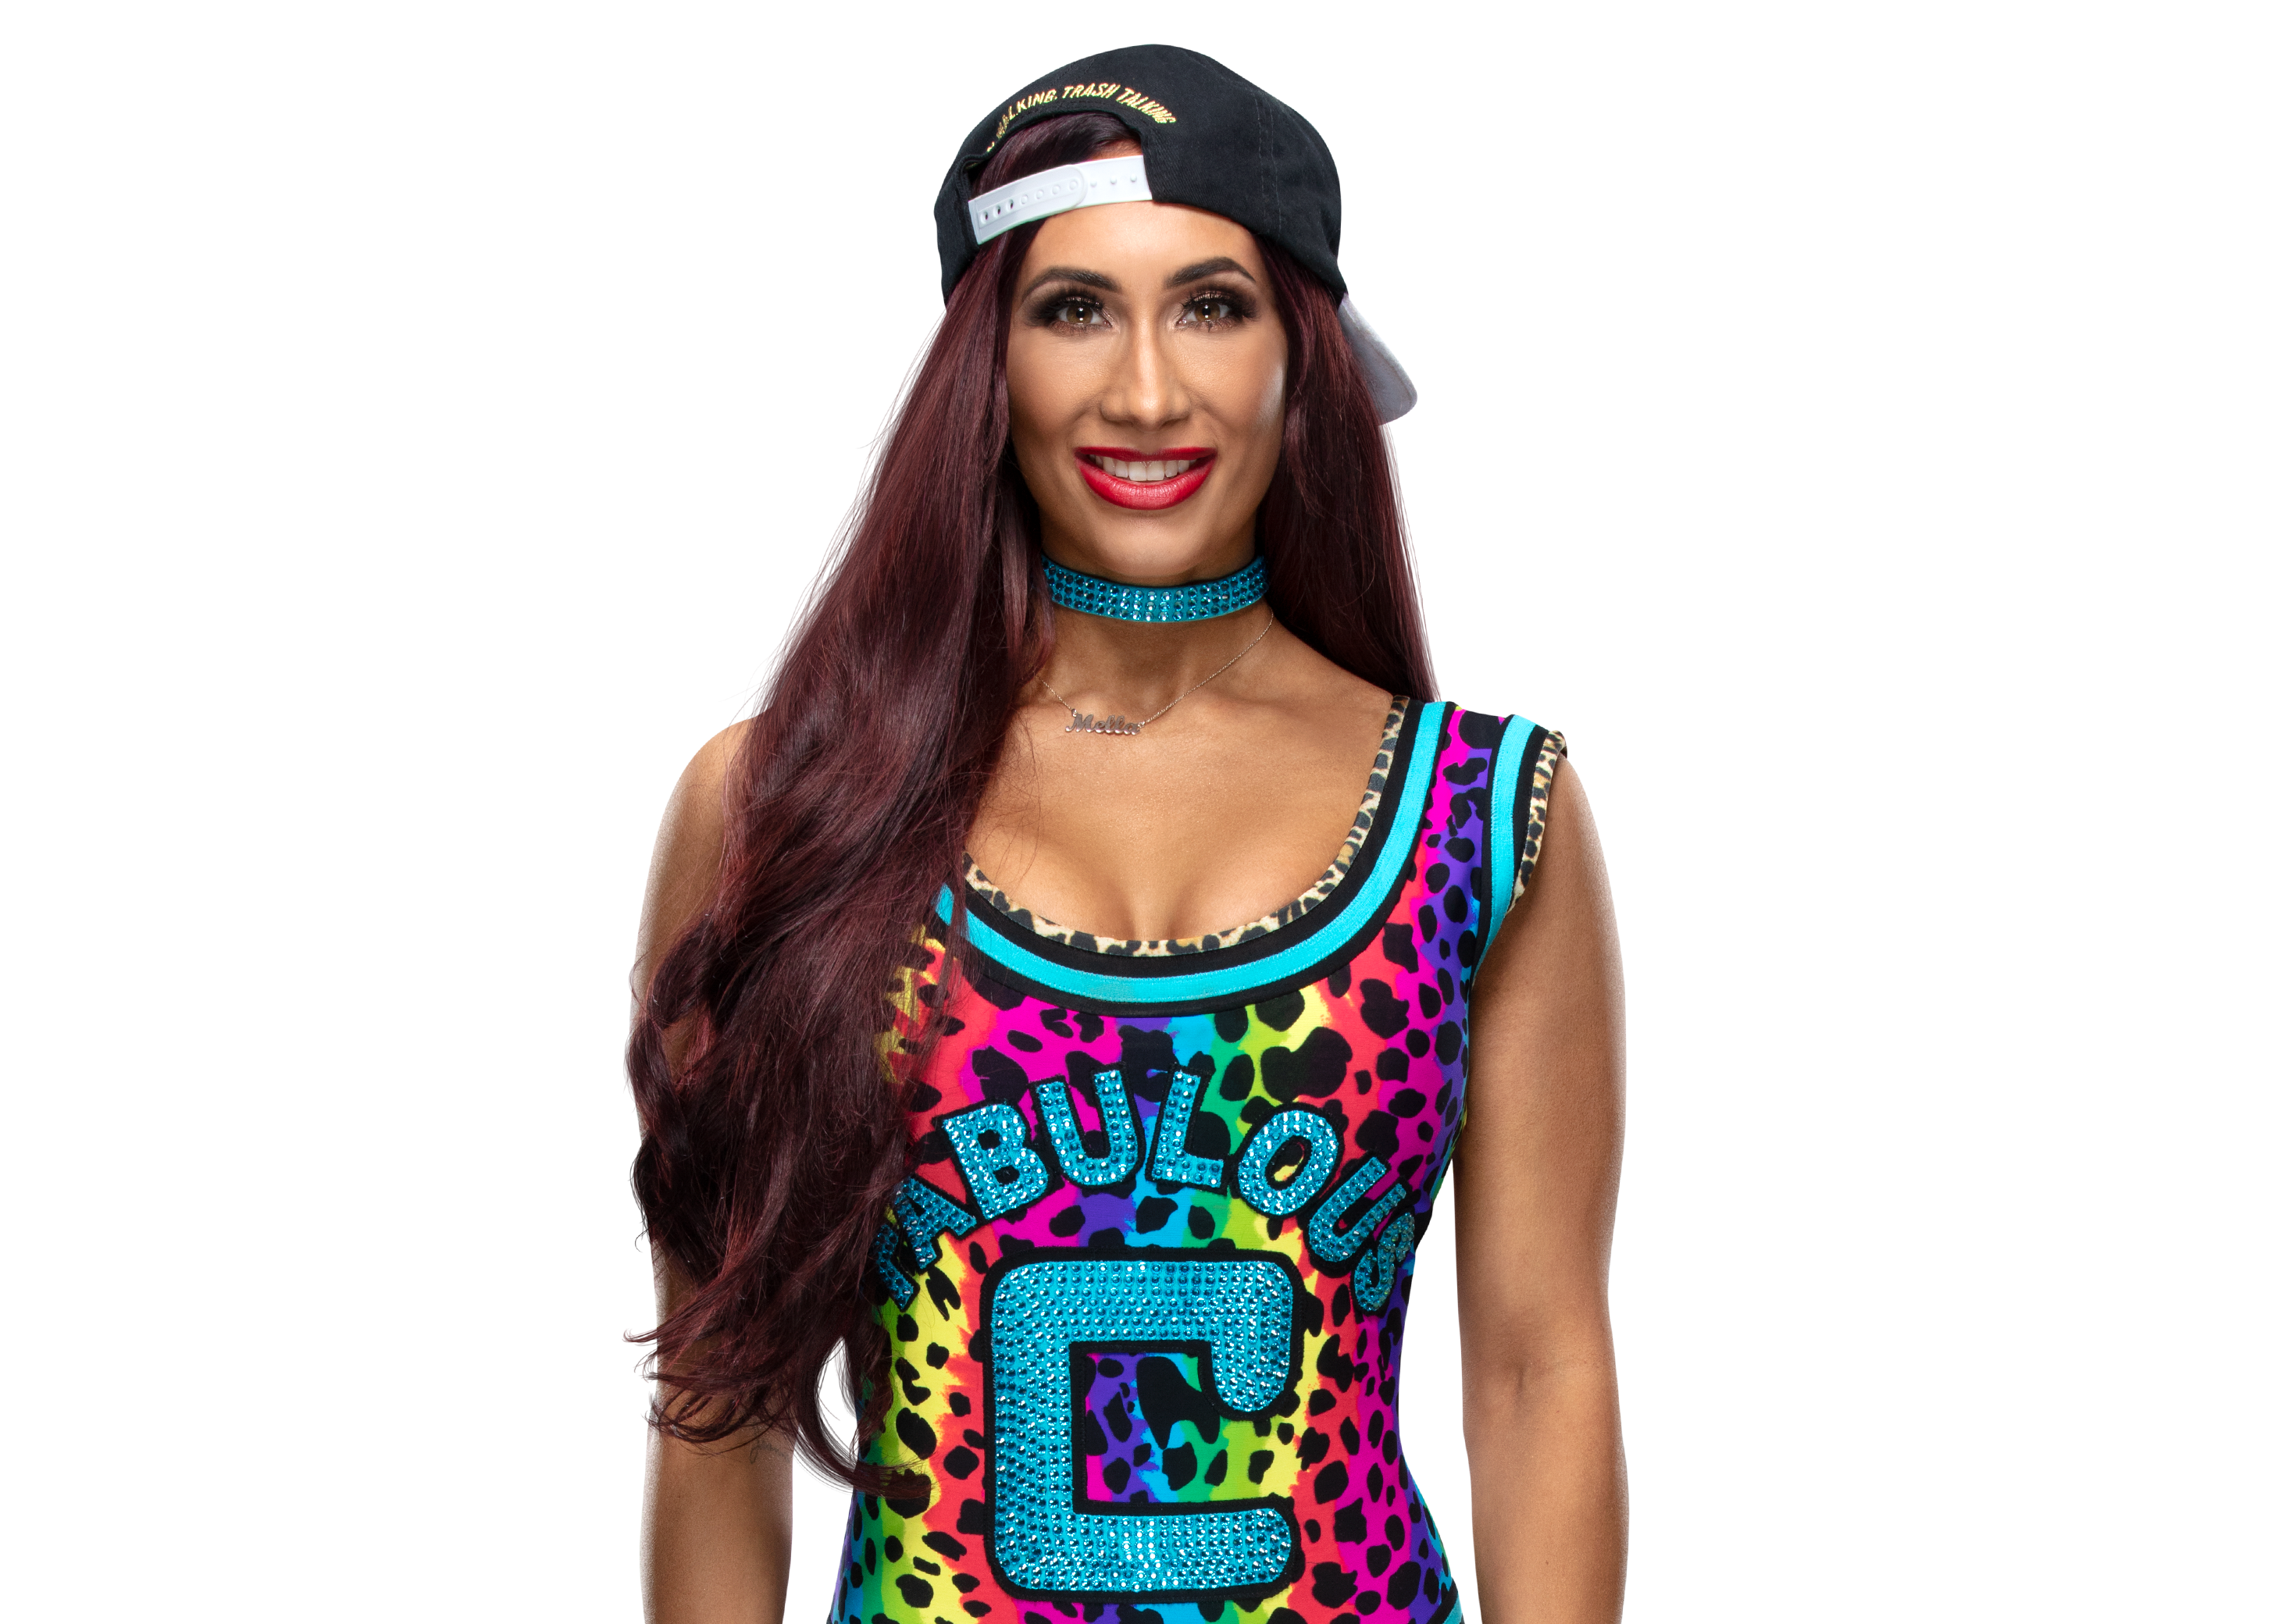 Fan : quot;Does Carmella ever take a bad picture ?quot; / Carmella : quot;Yes. Please refer to my render 